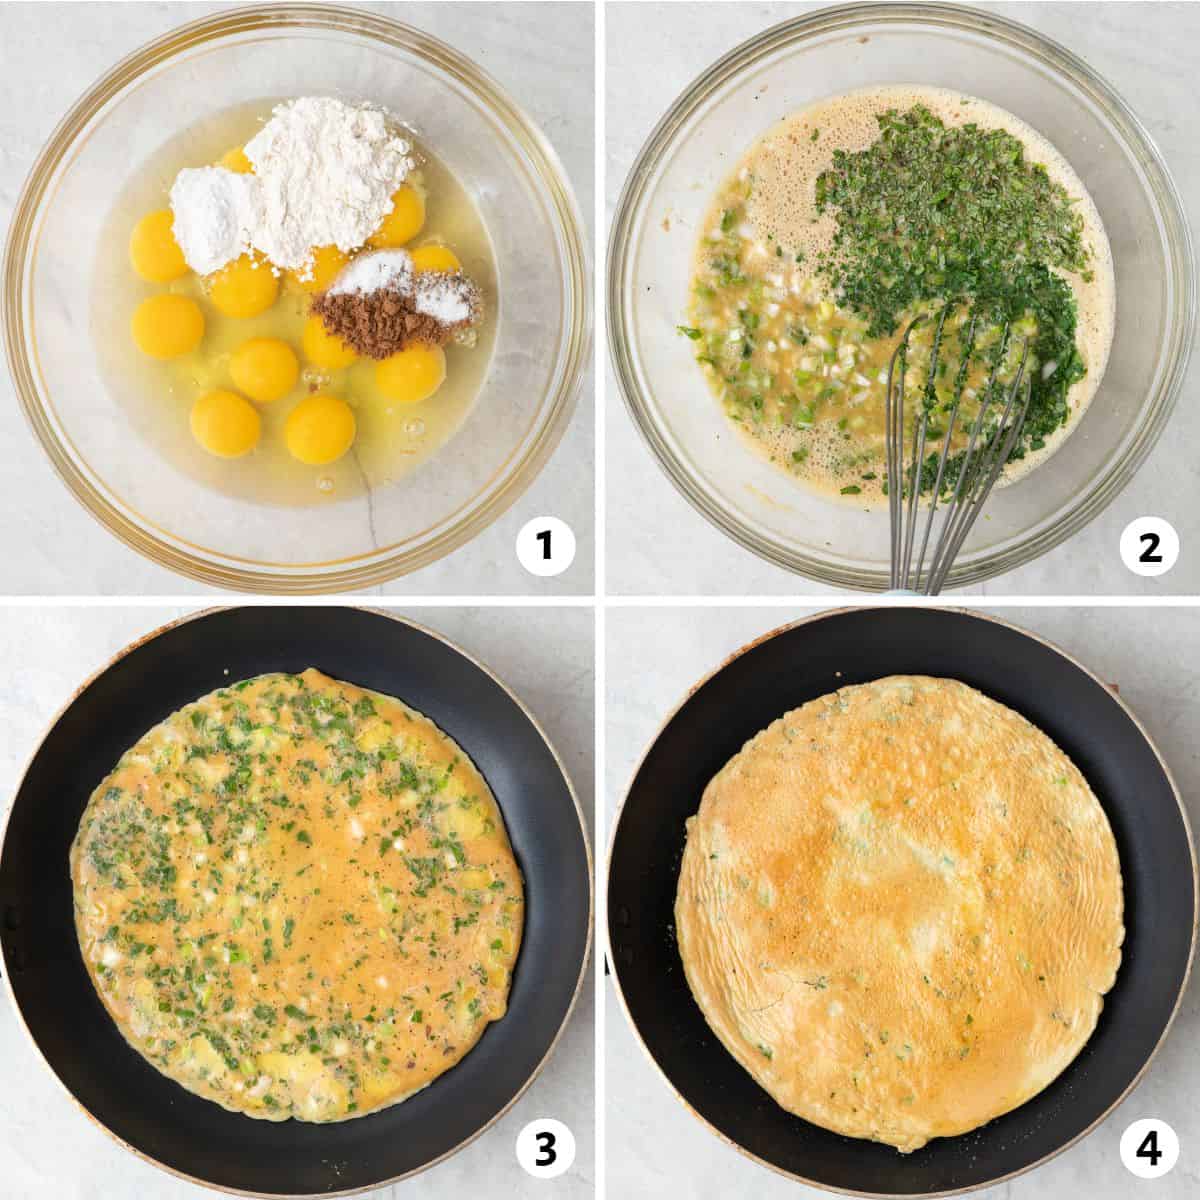 4 image collage making recipe: 1- eggs, spices and flour in a bowl before whisking, 2- whisking in green onions and herbs, 3- eggs in pan partially cooked, 4- after flipping.